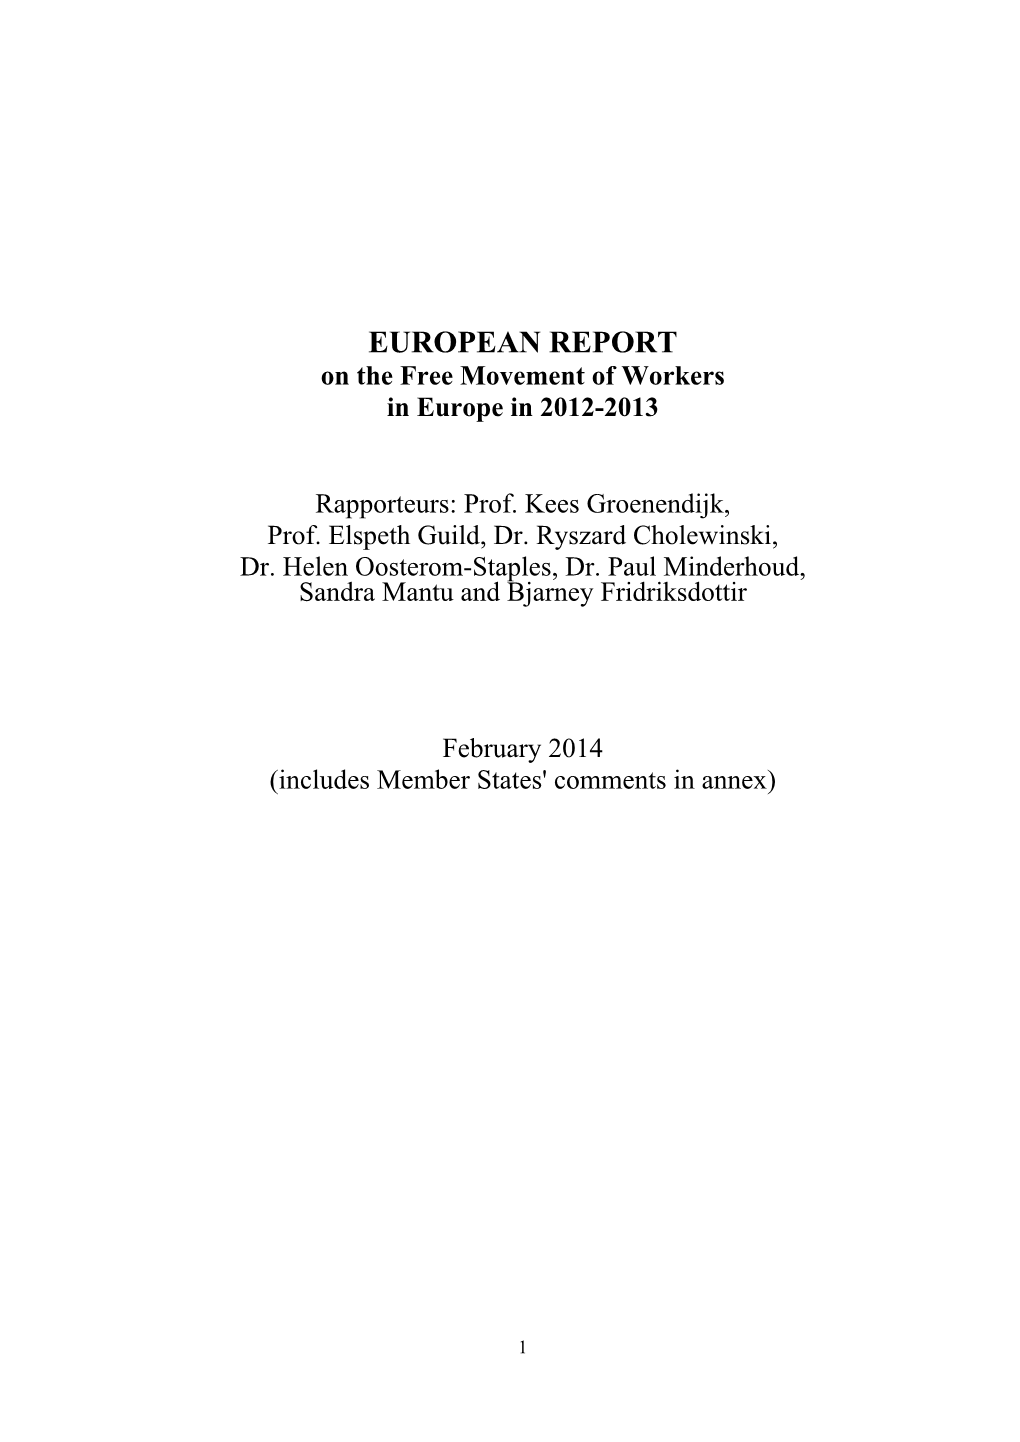 EUROPEAN REPORT on the Free Movement of Workers in Europe in 2012-2013